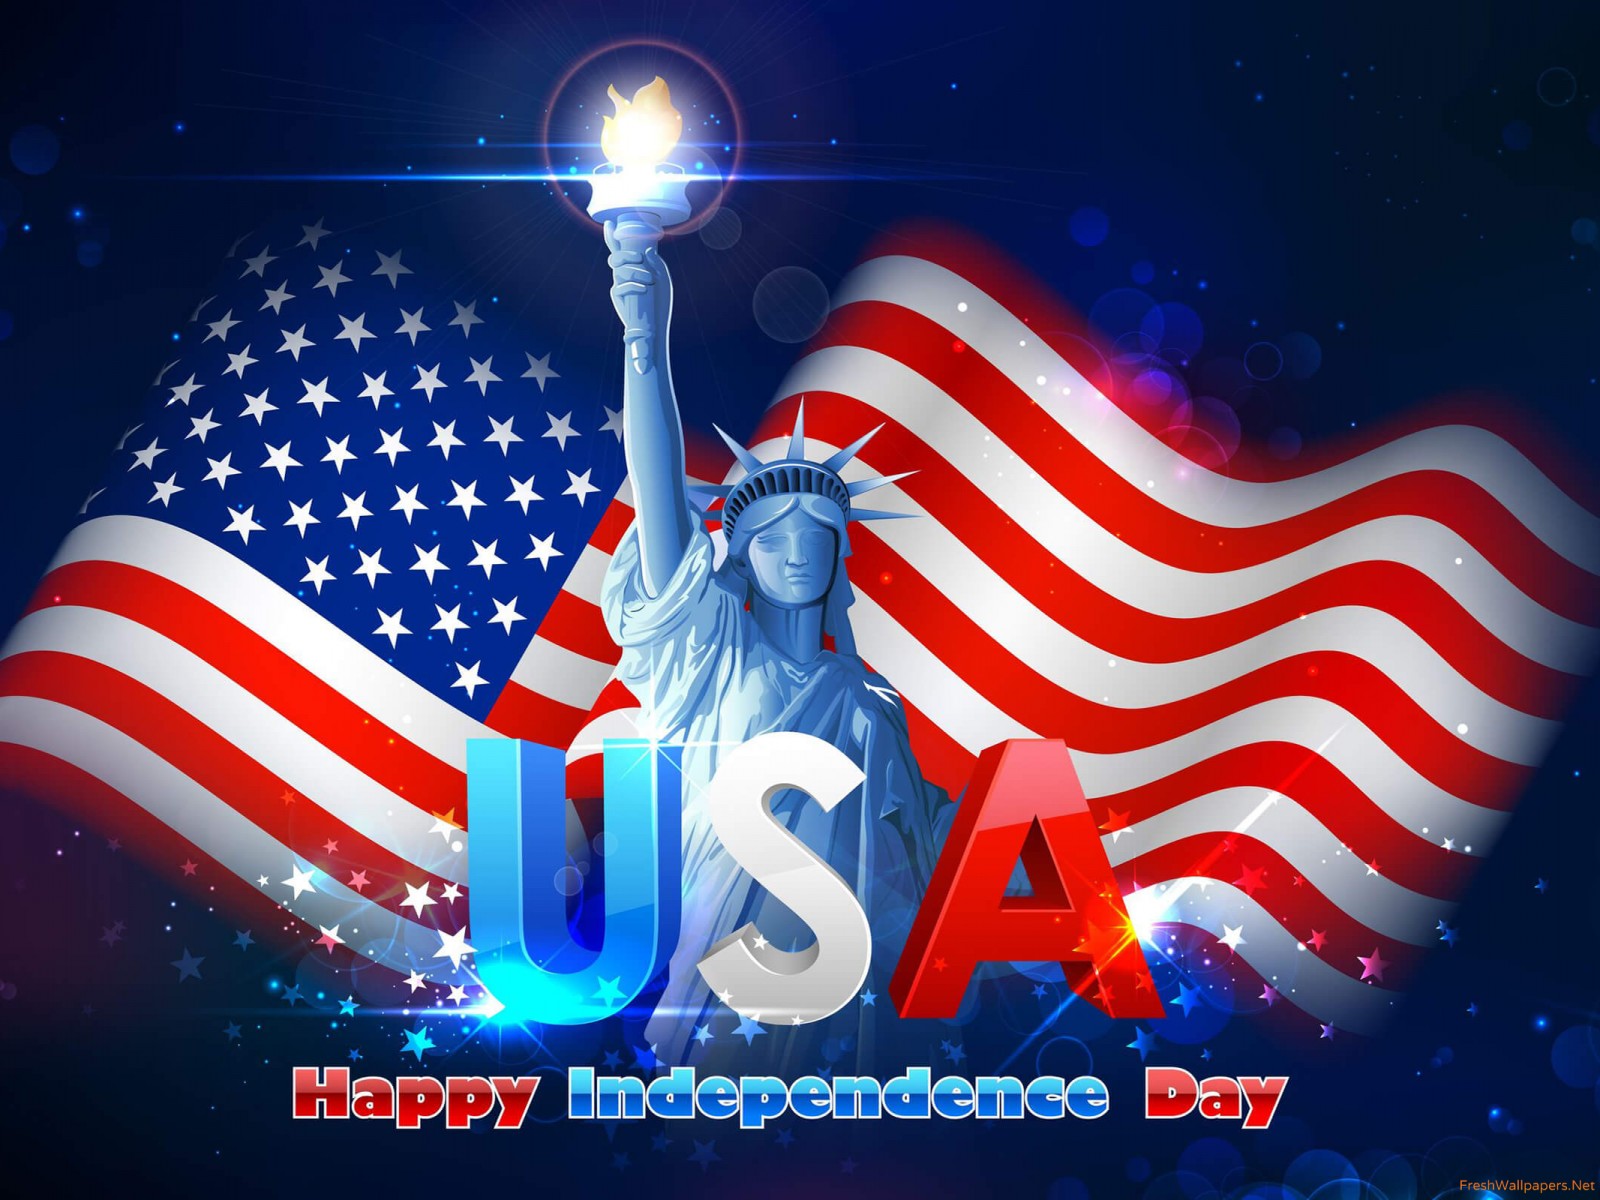 Happy Independence Day USA wallpapers Freshwallpapers